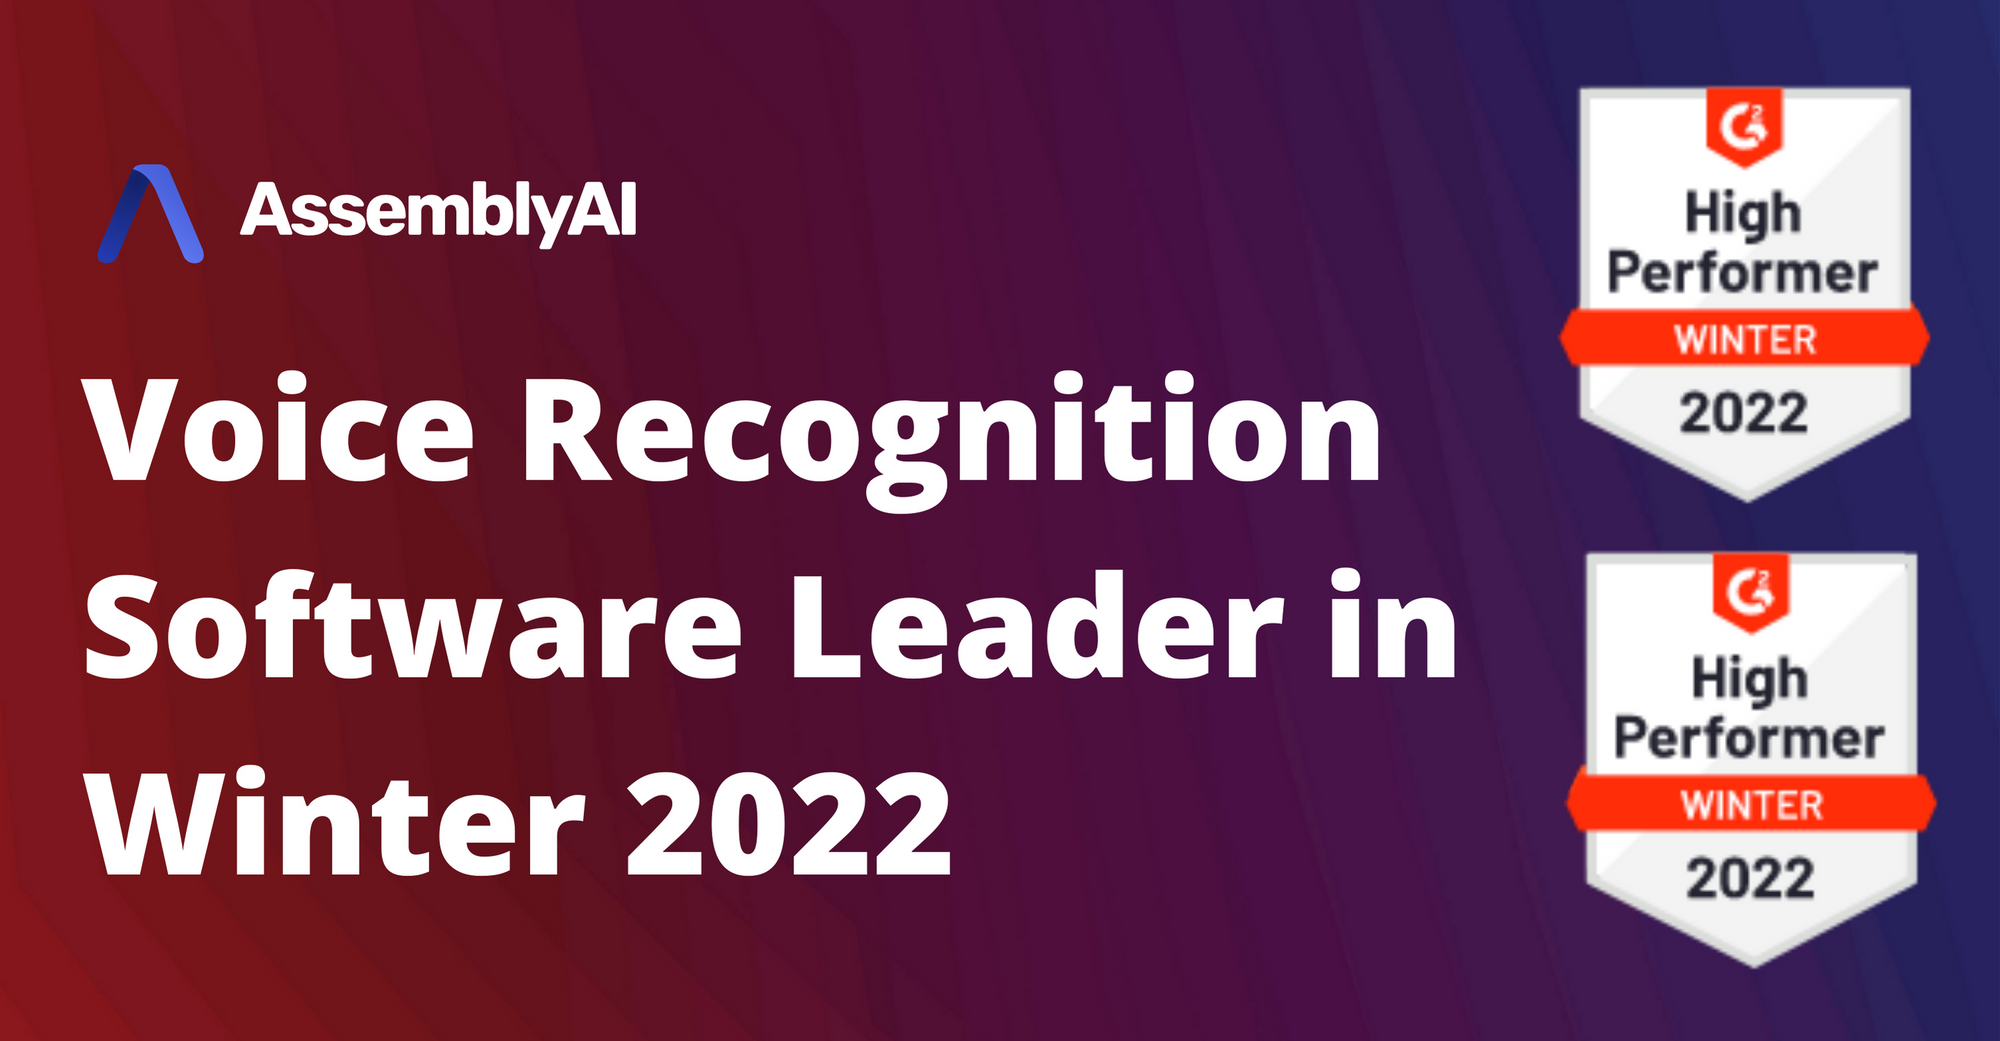 AssemblyAI Named G2 Voice Recognition Software Leader in Winter 2022